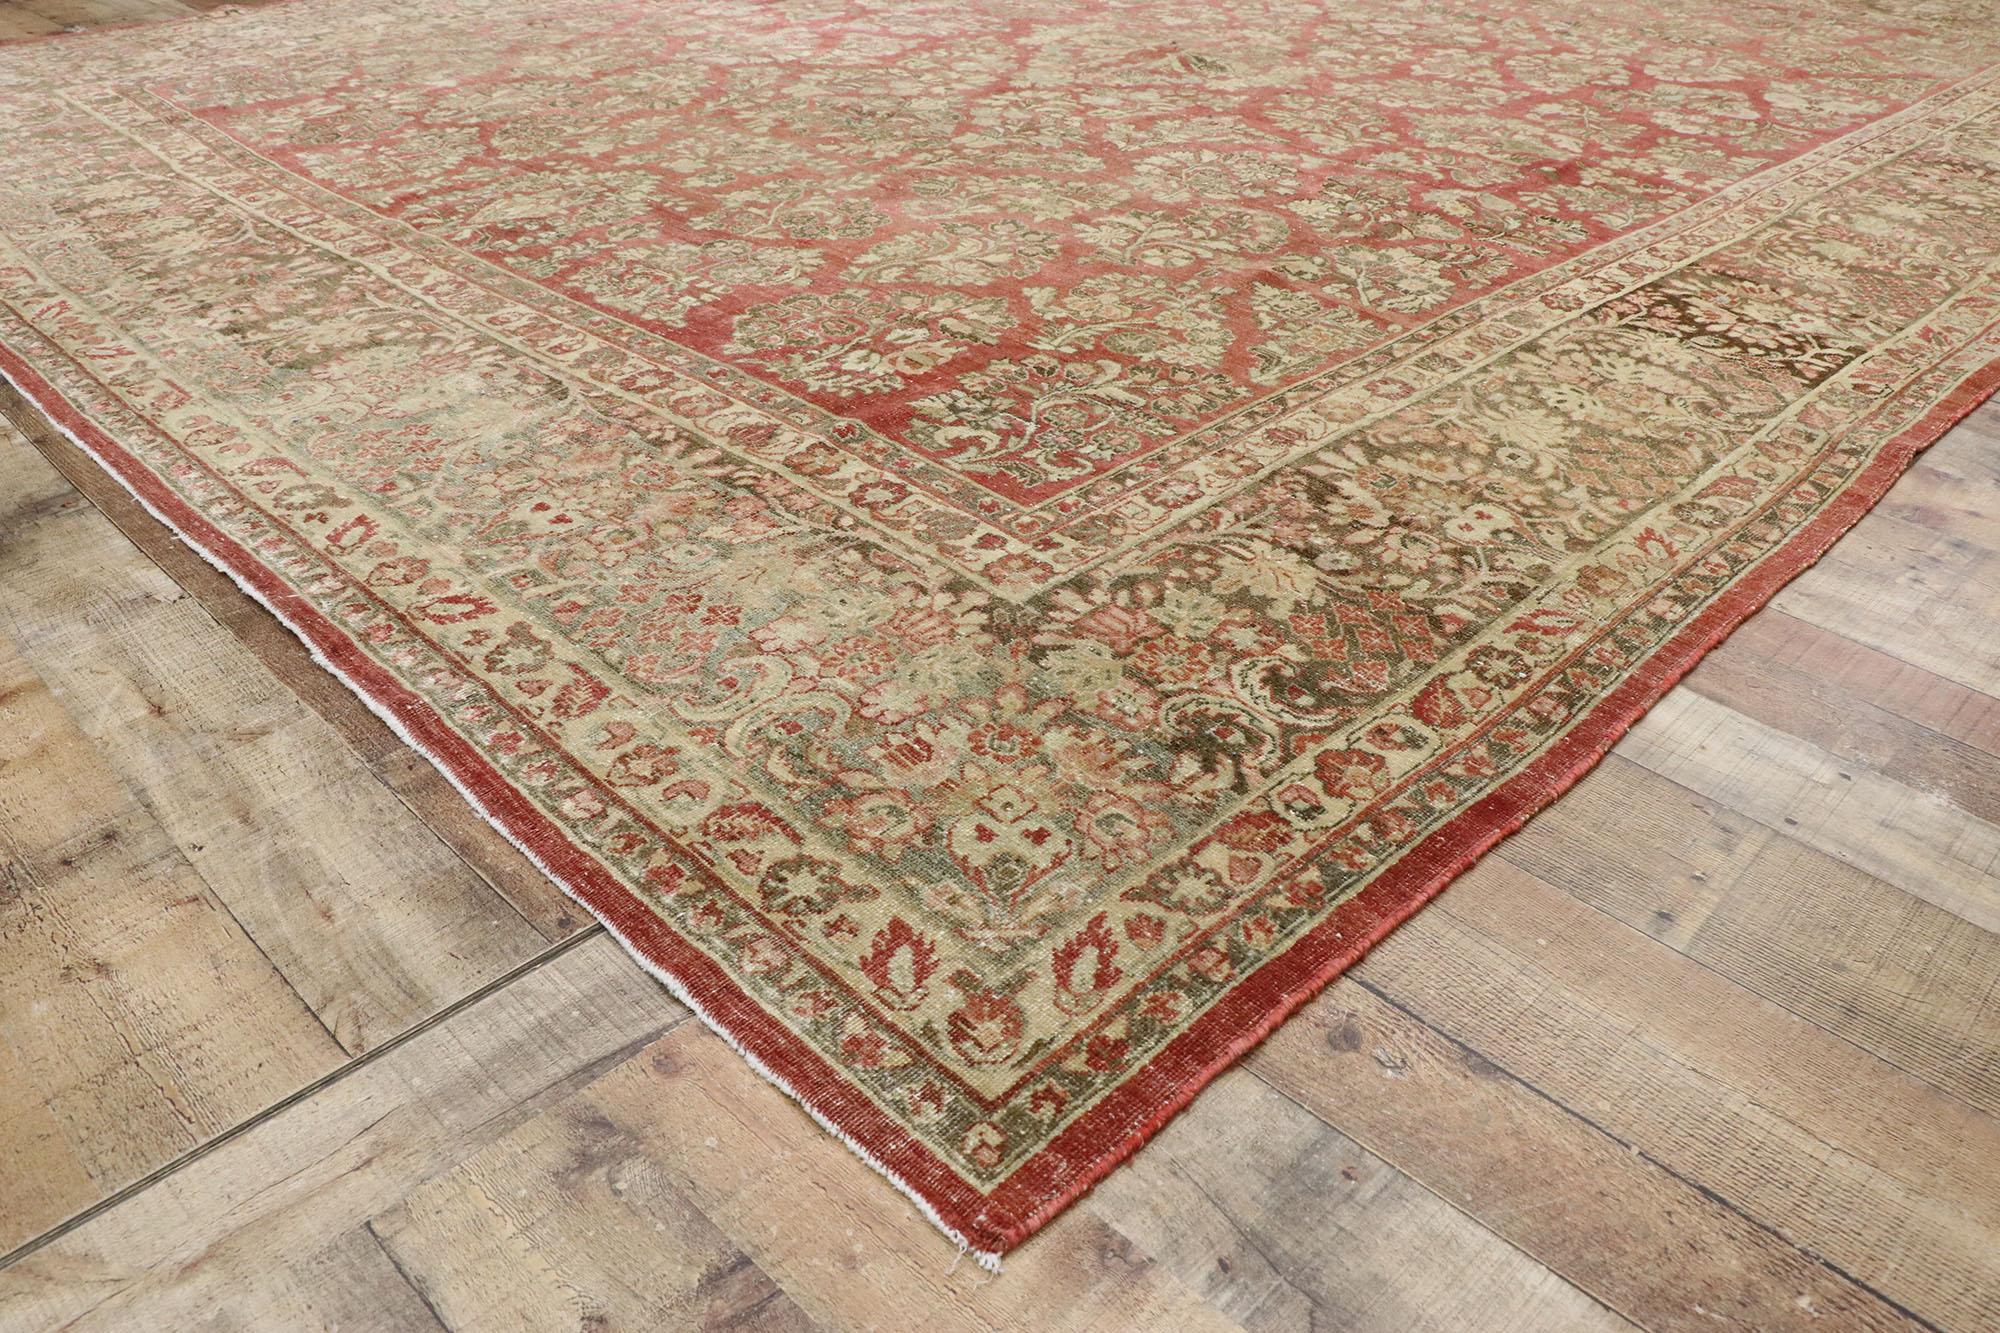 20th Century Distressed Antique Persian Sarouk Rug with Rustic American Traditional Style For Sale